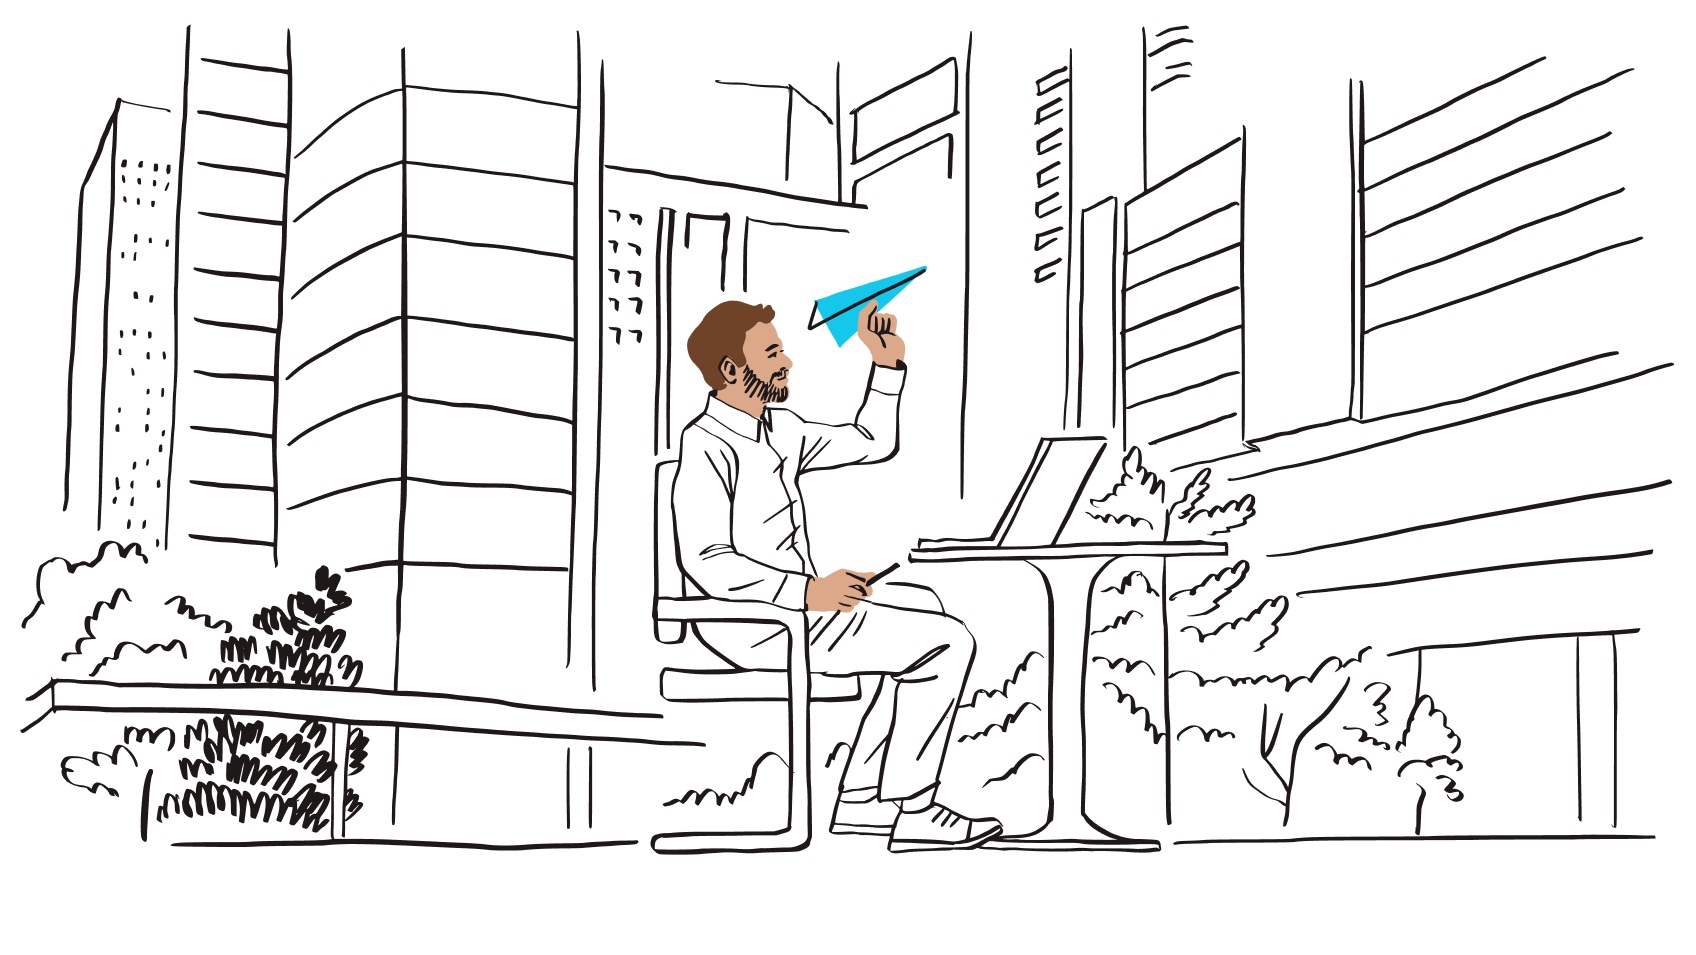 ​​An illustration of a person throwing a paper plane while sat at a laptop, symbolizing file sharing